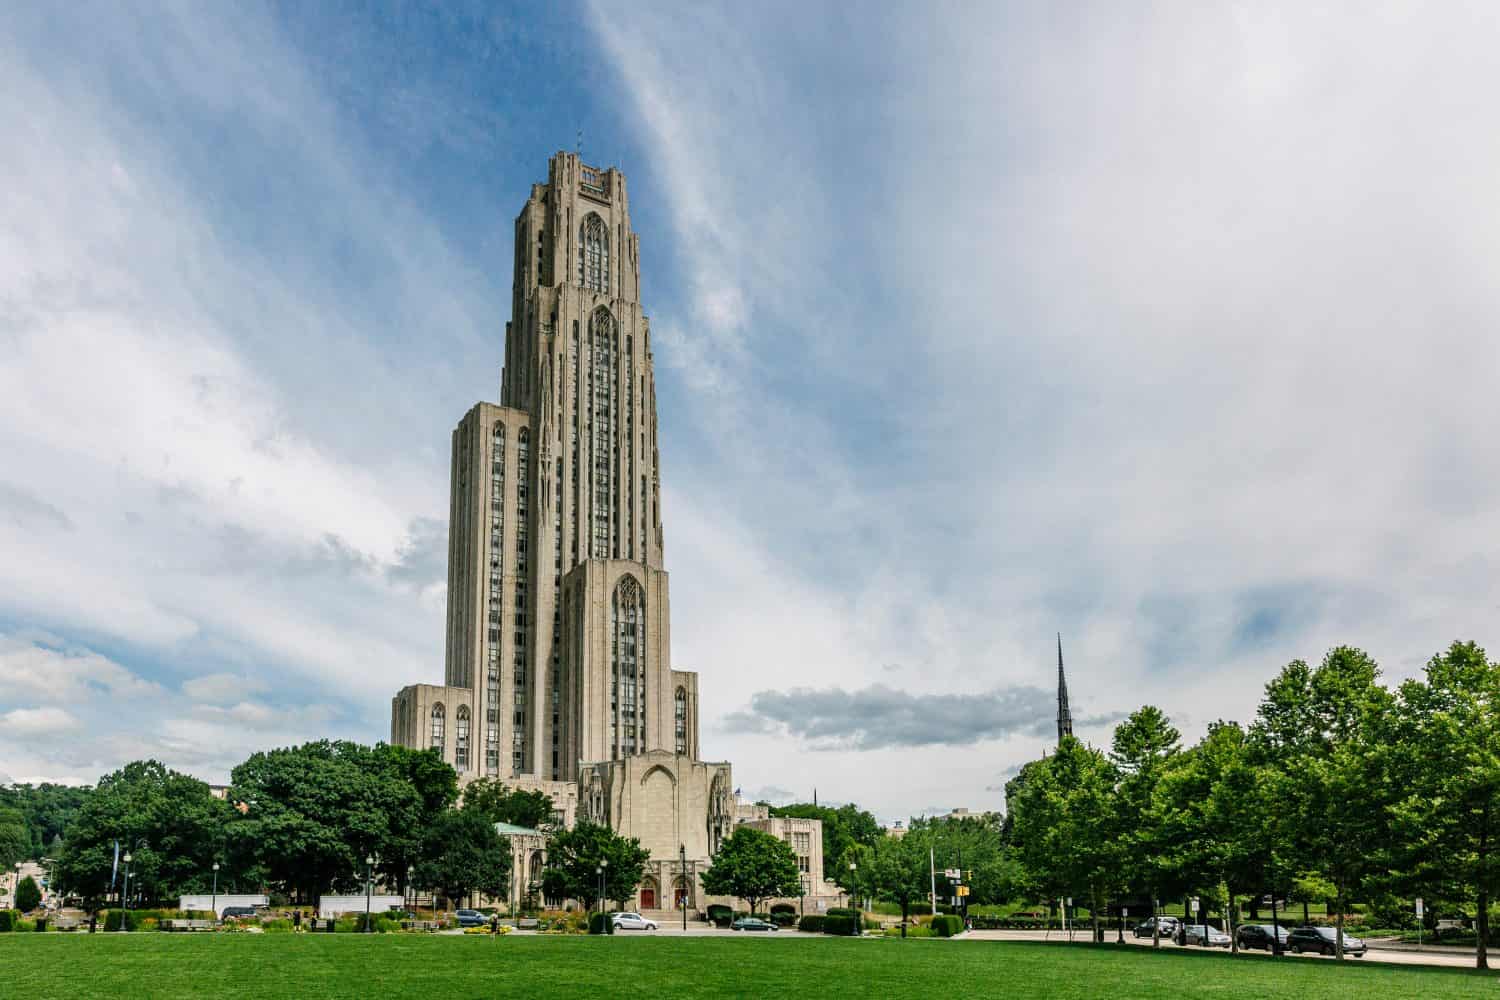 Cathedral of Learning, a 42-story Late Gothic Revival Cathedral, at the University of Pittsburgh's main campus in Pittsburgh, USA